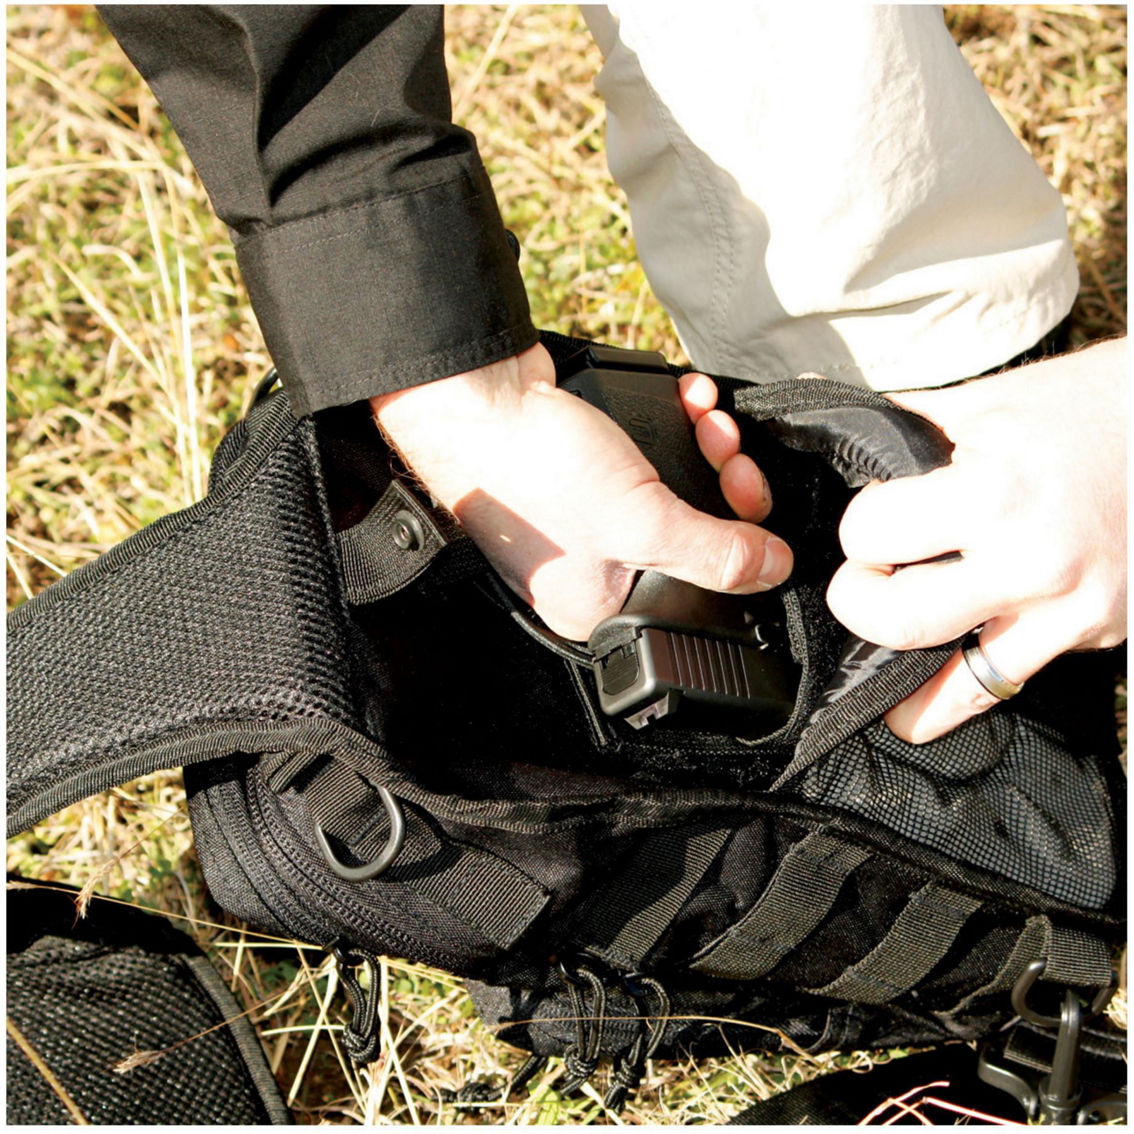 Red Rock Outdoor Gear Rover Sling Pack - Image 2 of 2